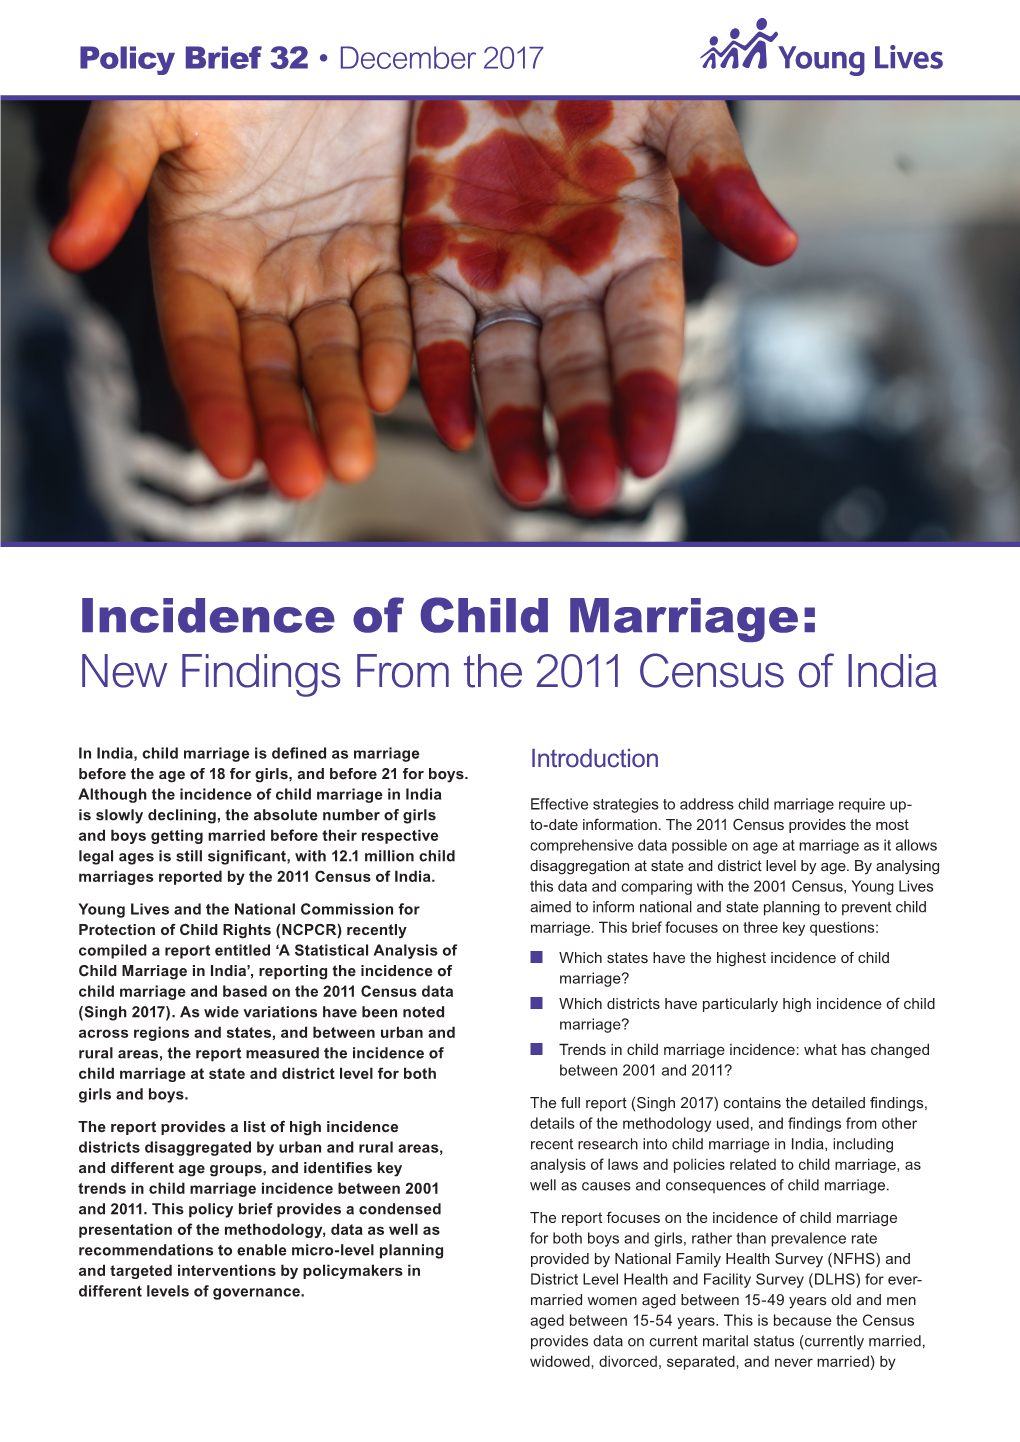 Incidence of Child Marriage: New Findings from the 2011 Census of India